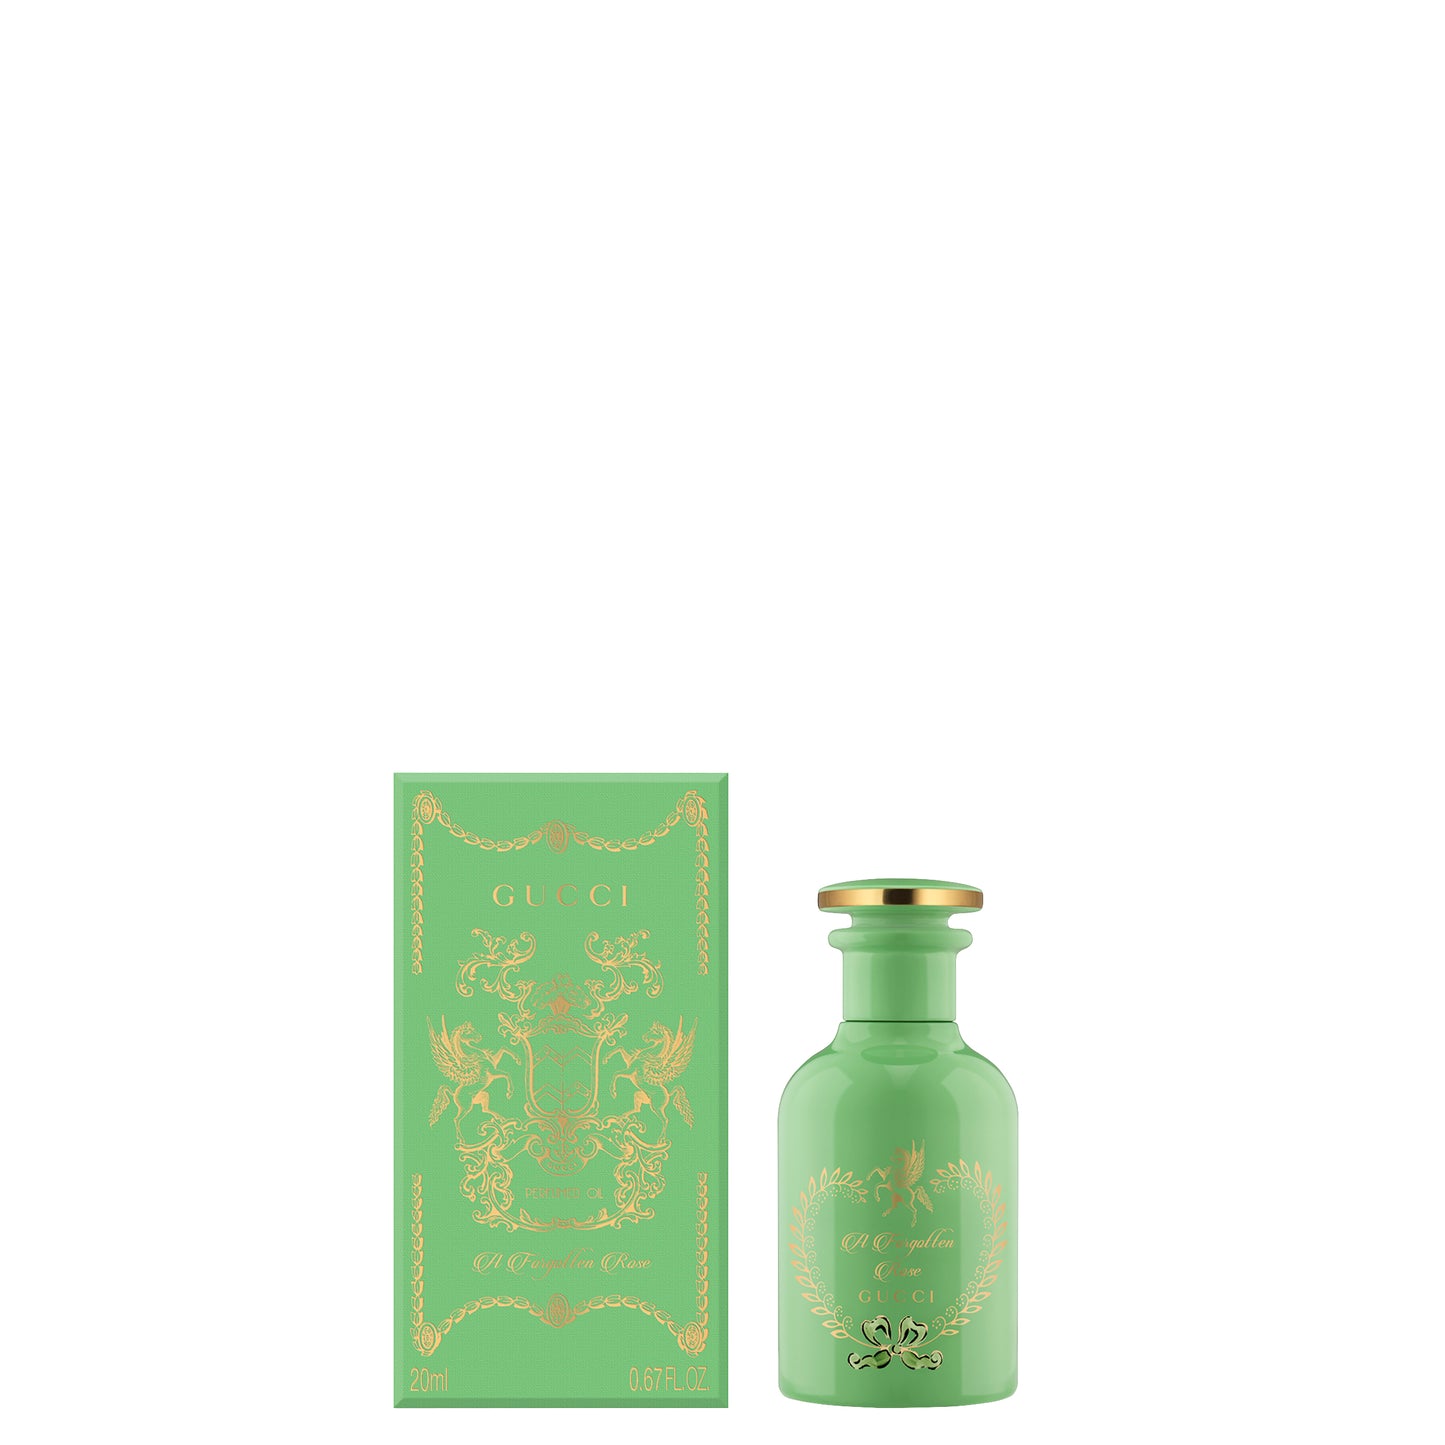 Gucci Alchemist Garden A song for the Rose Body Oil 20 ML